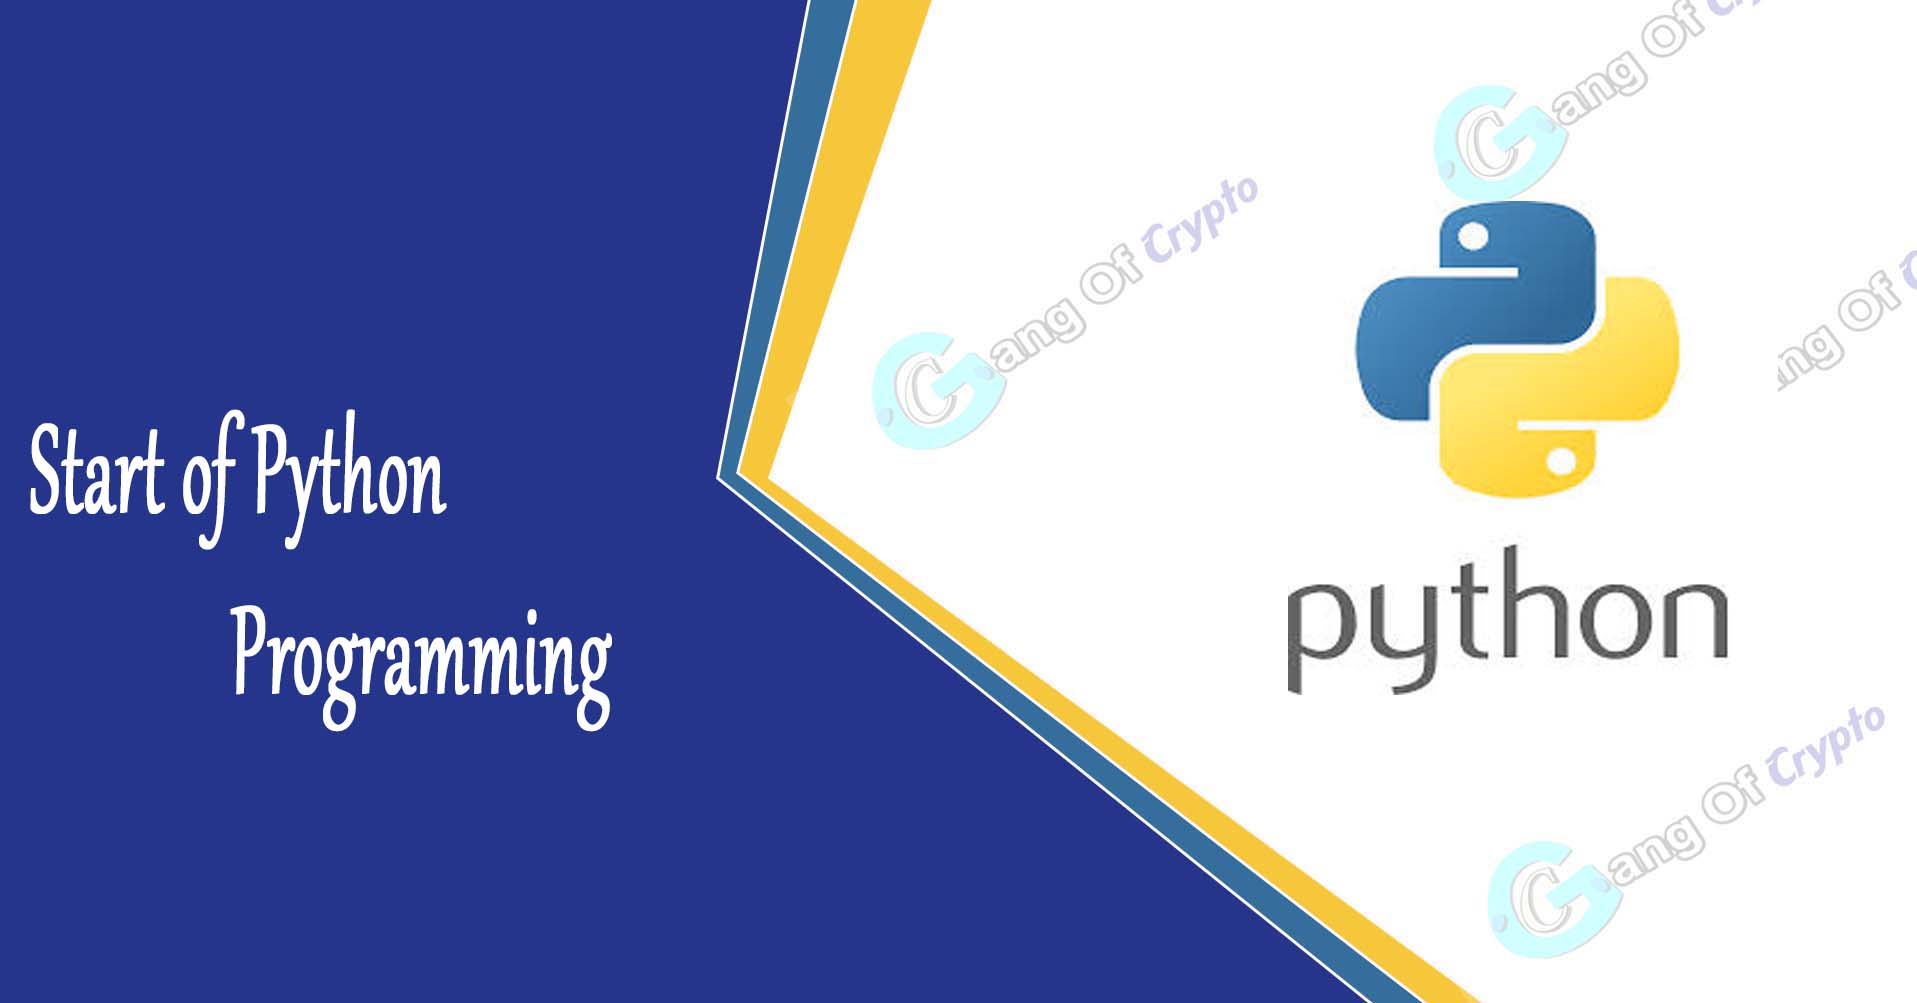 How to start programming in Python